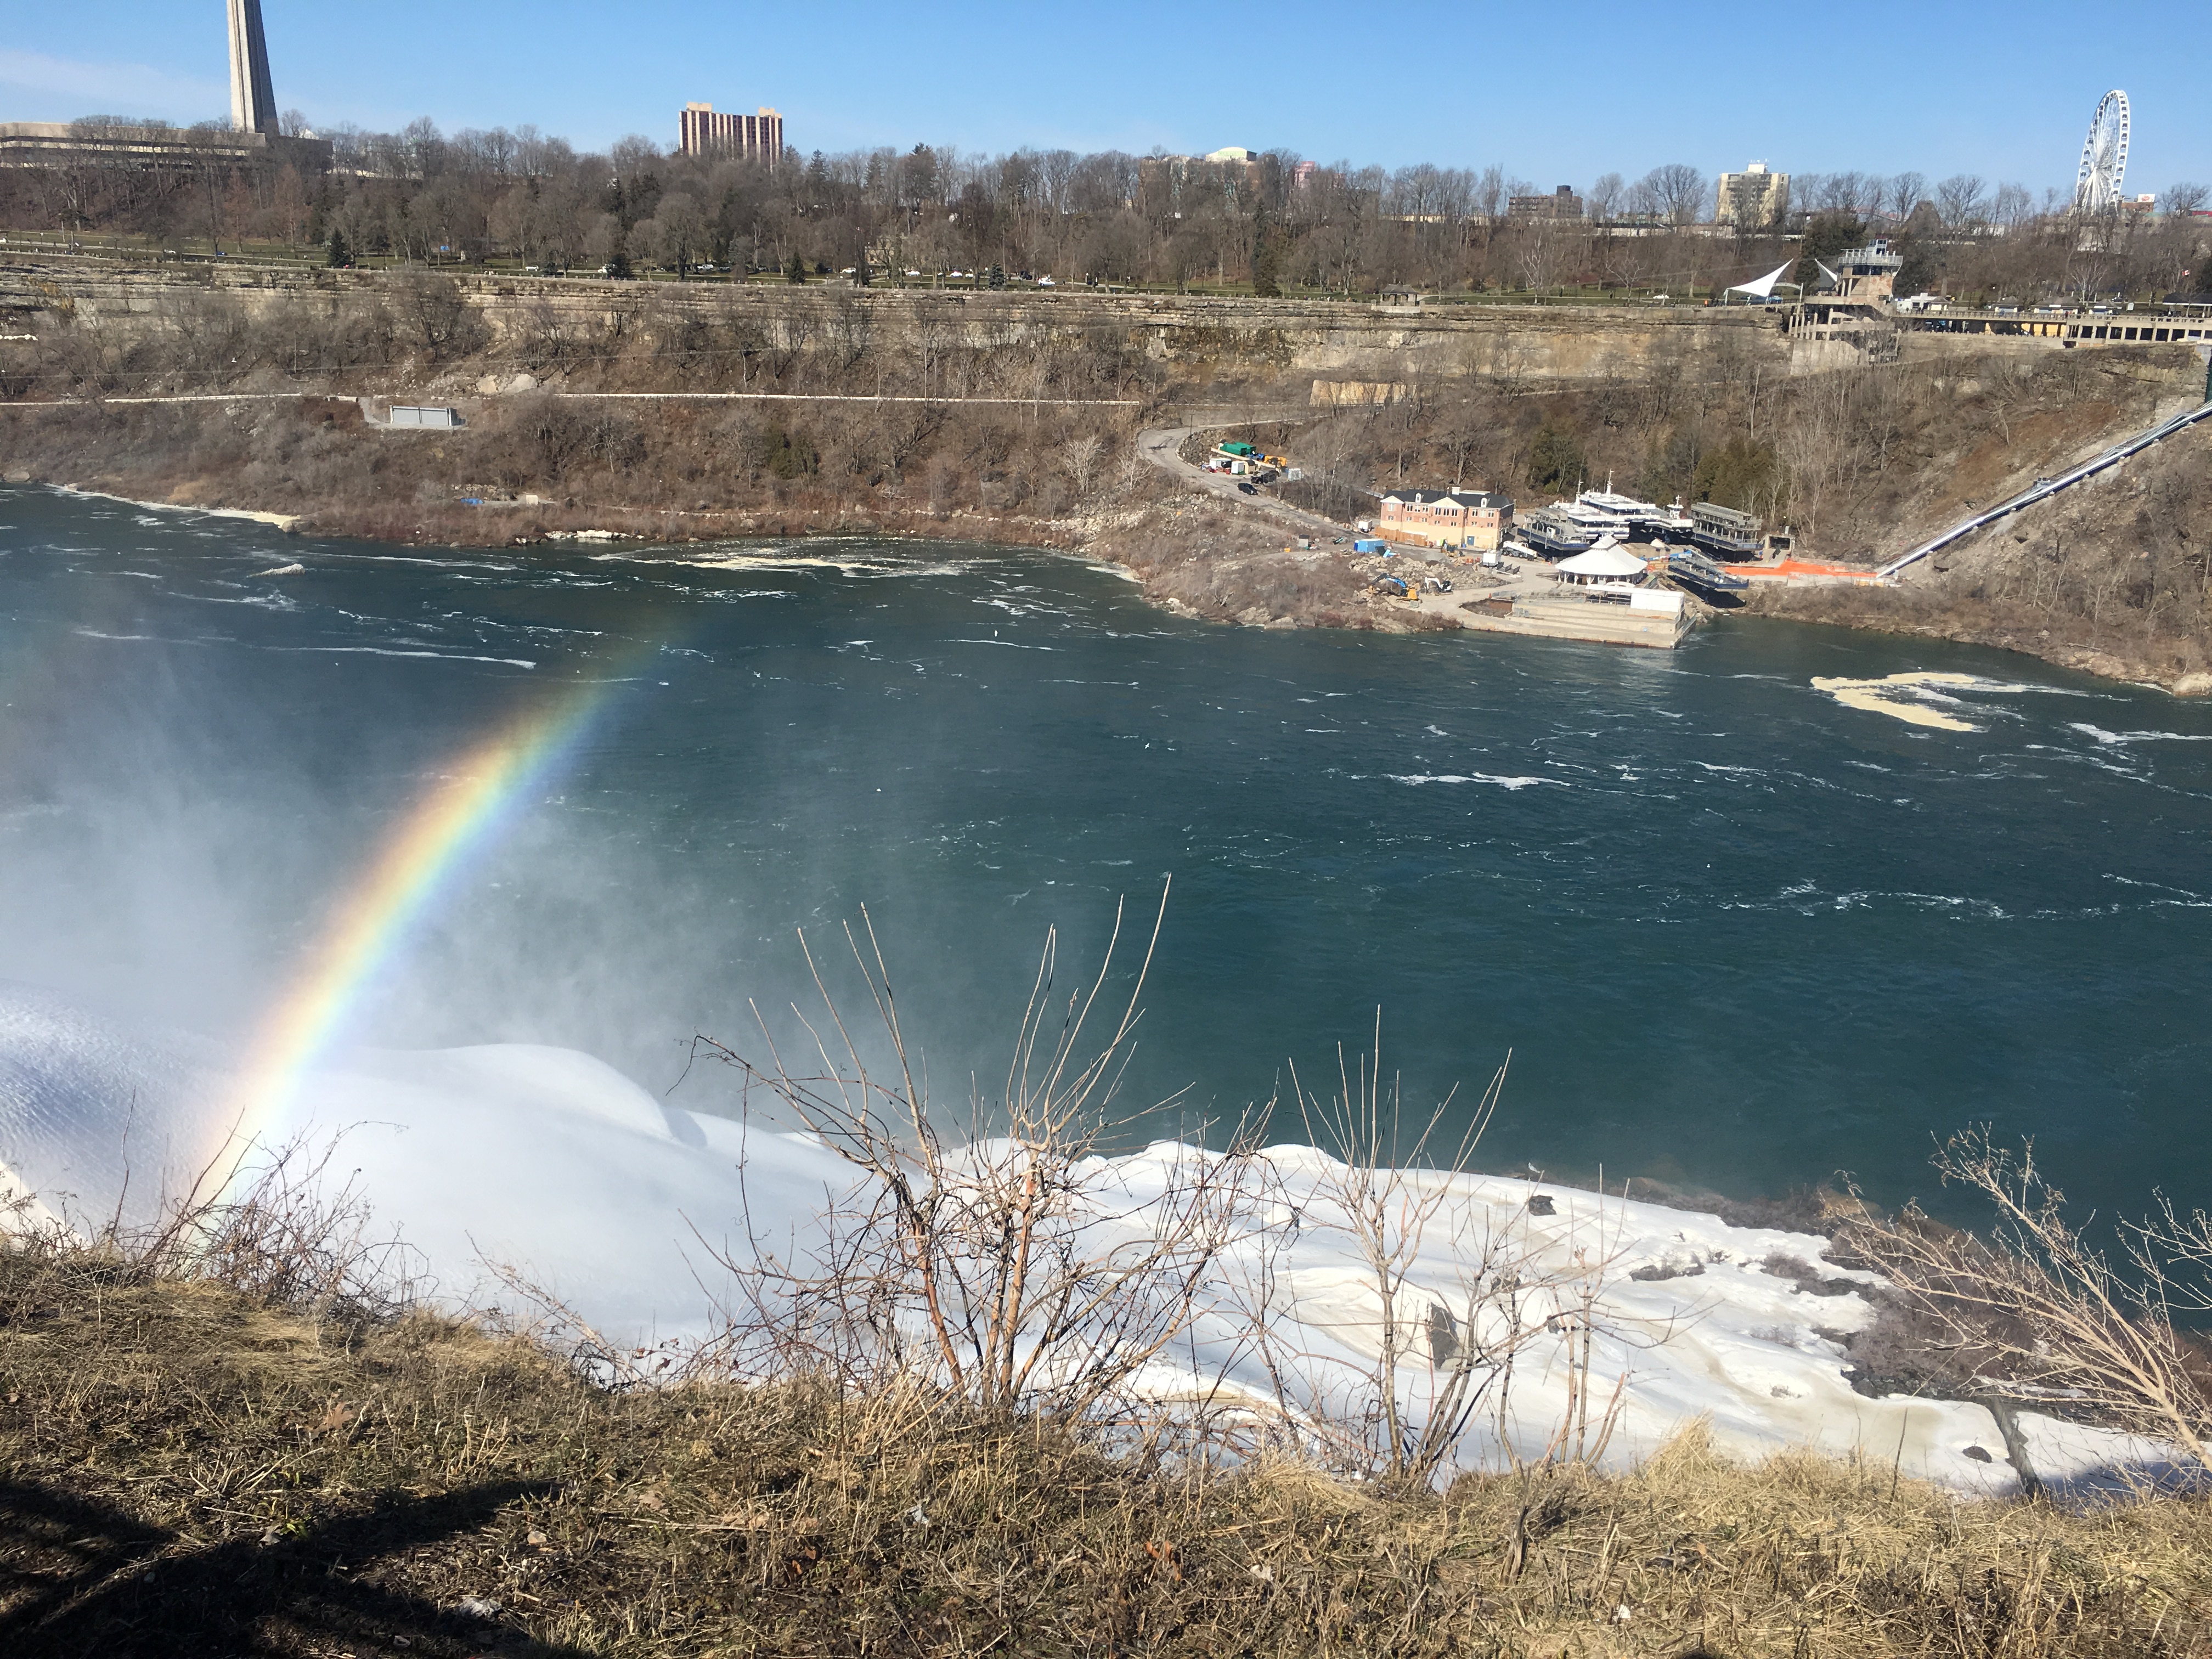 The Niagara Falls with a rainbow overarching it.